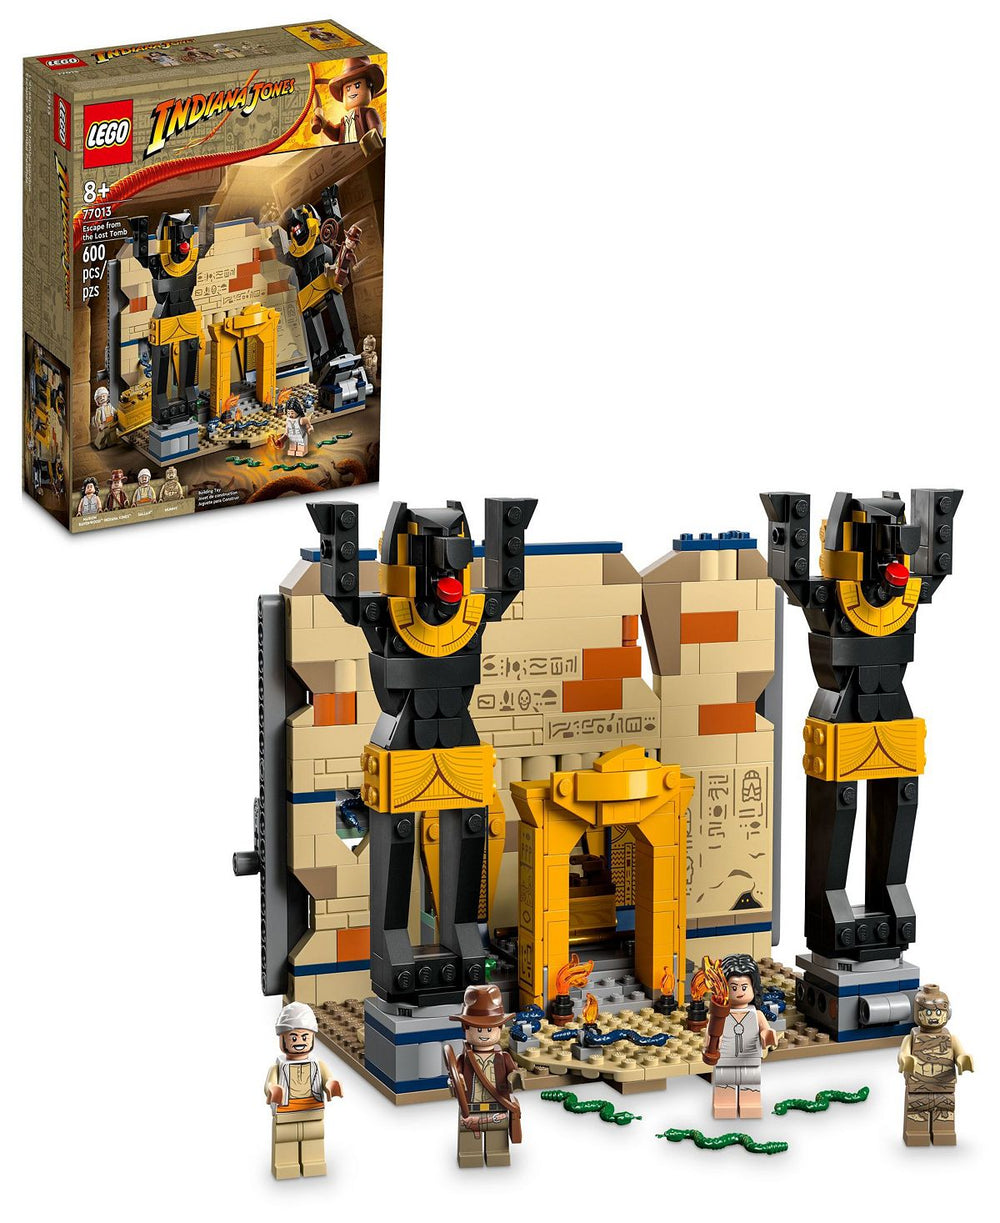 LEGO Indiana Jones‚Ñ¢ 600-Piece Escape from the Lost Tomb Building Set 77013